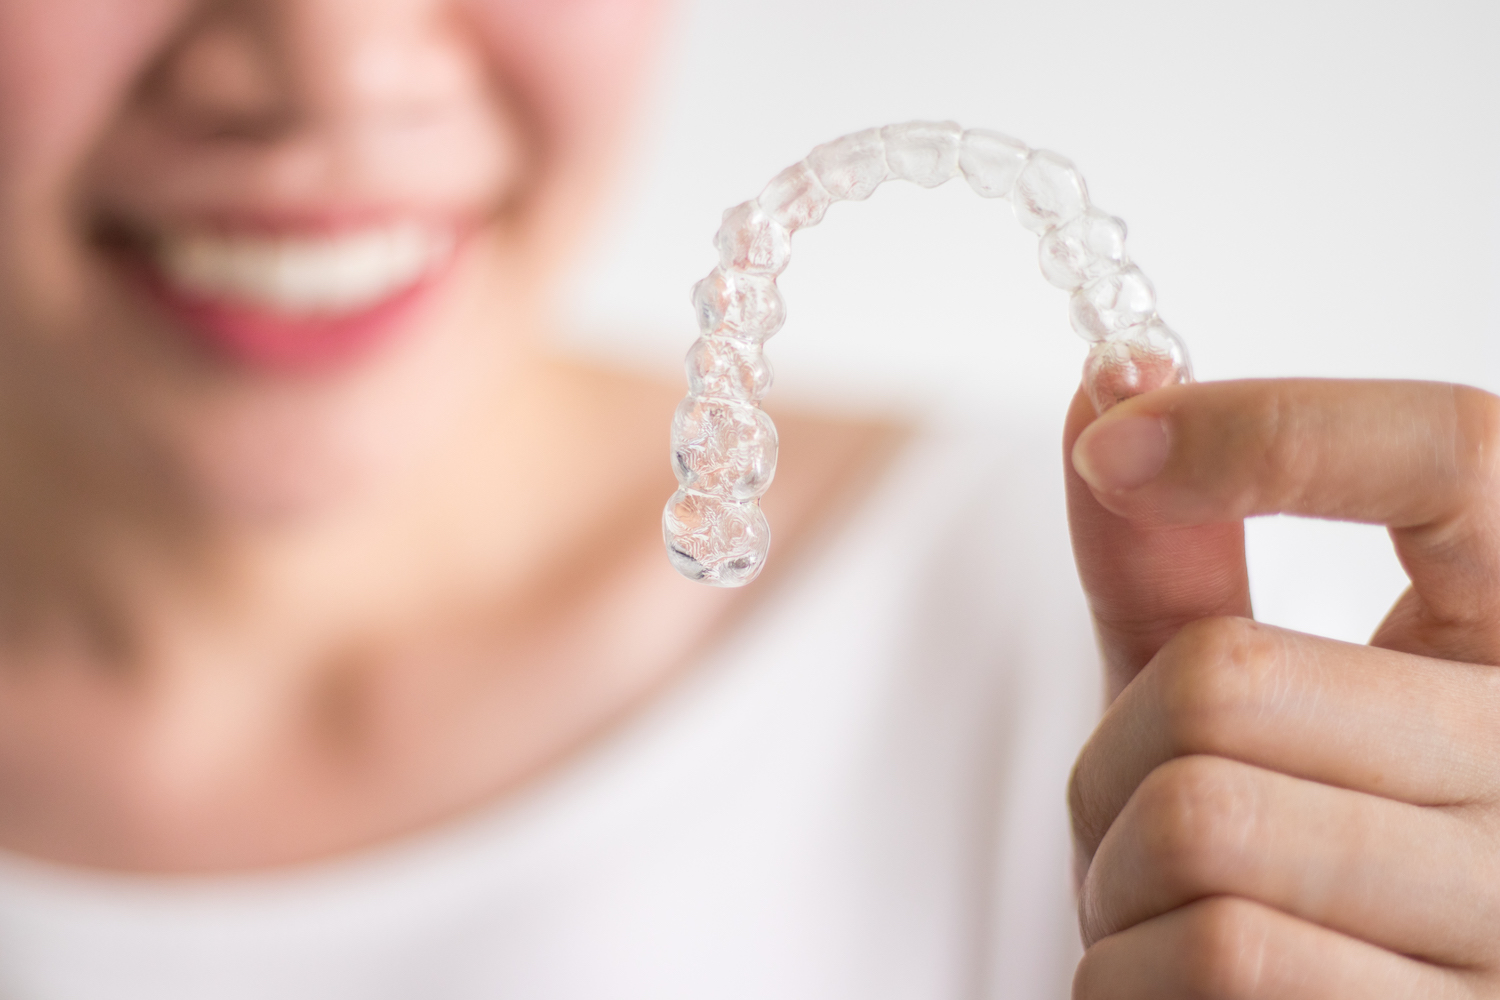 A blurry woman holds up her Invisalign aligner in the forefront